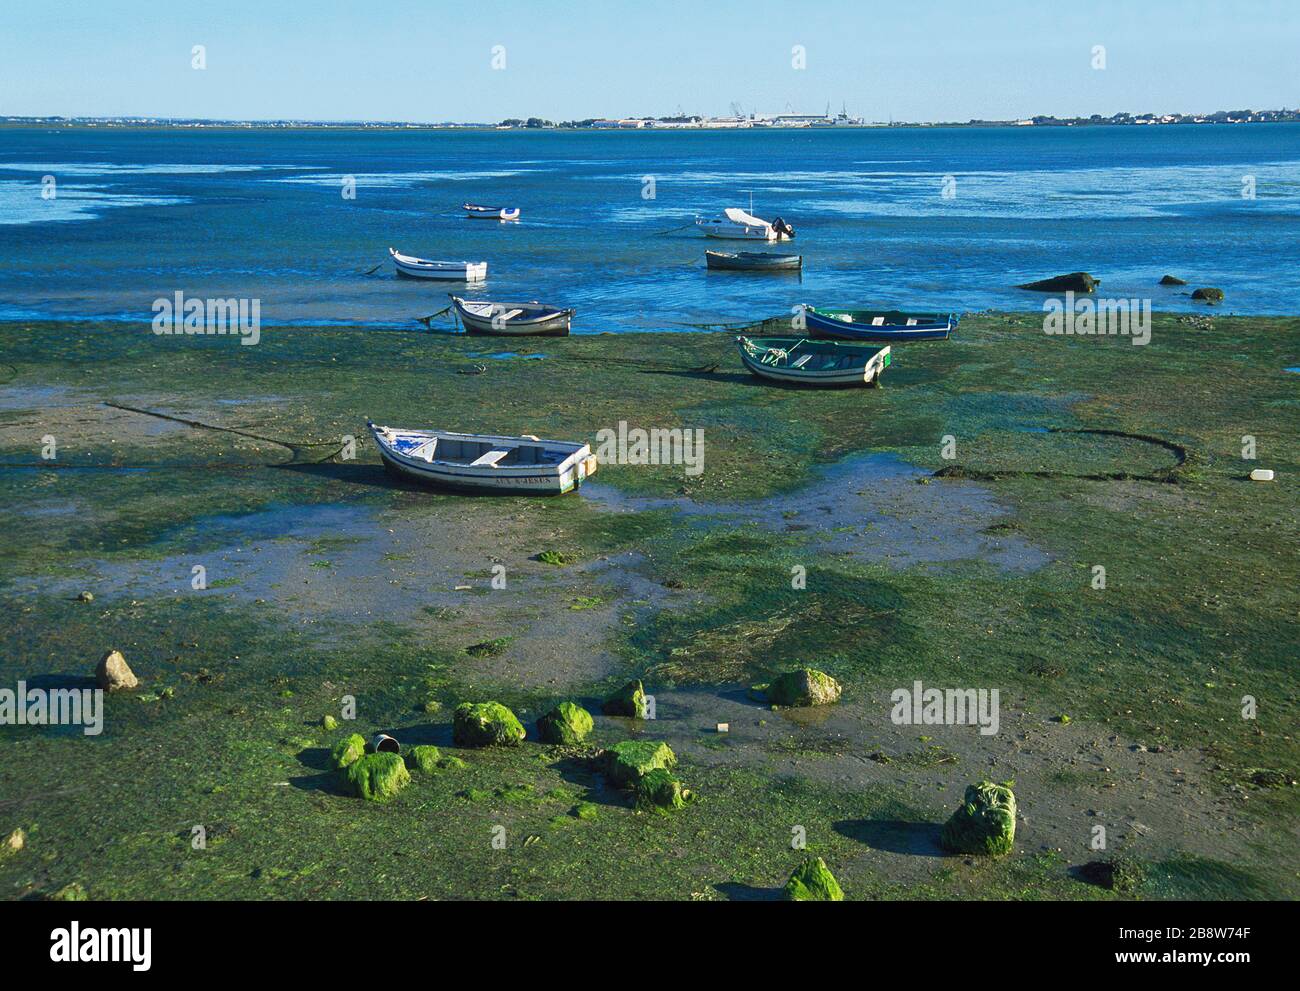 Low tide and boats. Puerto Real, Cadiz province, Andalucia, Spain. Stock Photo